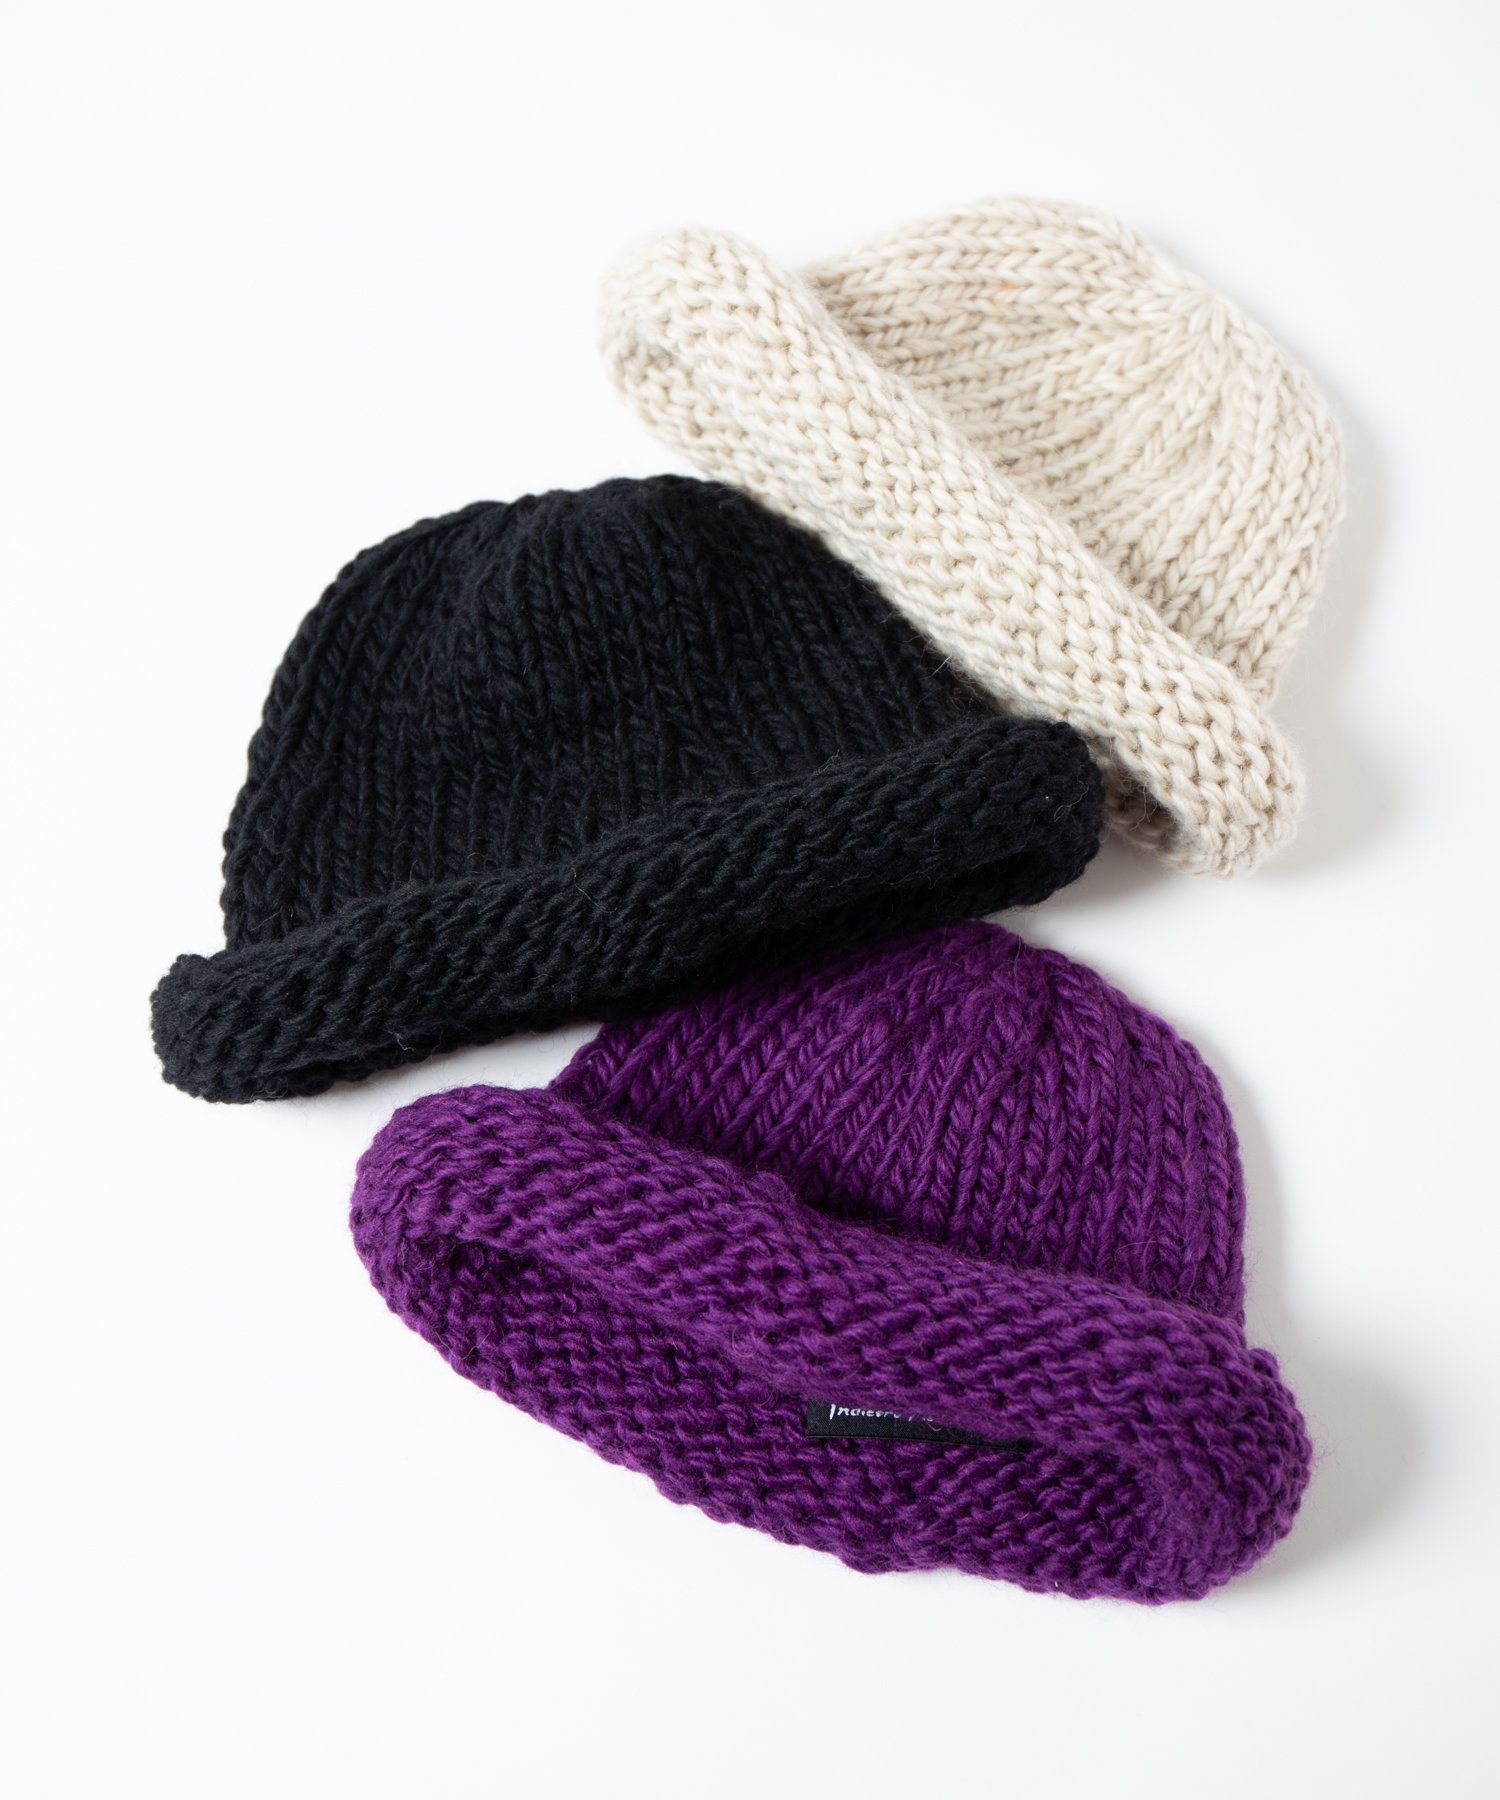 <img class='new_mark_img1' src='https://img.shop-pro.jp/img/new/icons15.gif' style='border:none;display:inline;margin:0px;padding:0px;width:auto;' />【Indietro Association】 Roll Hand Knit Cap / ロールハンドニットキャップ